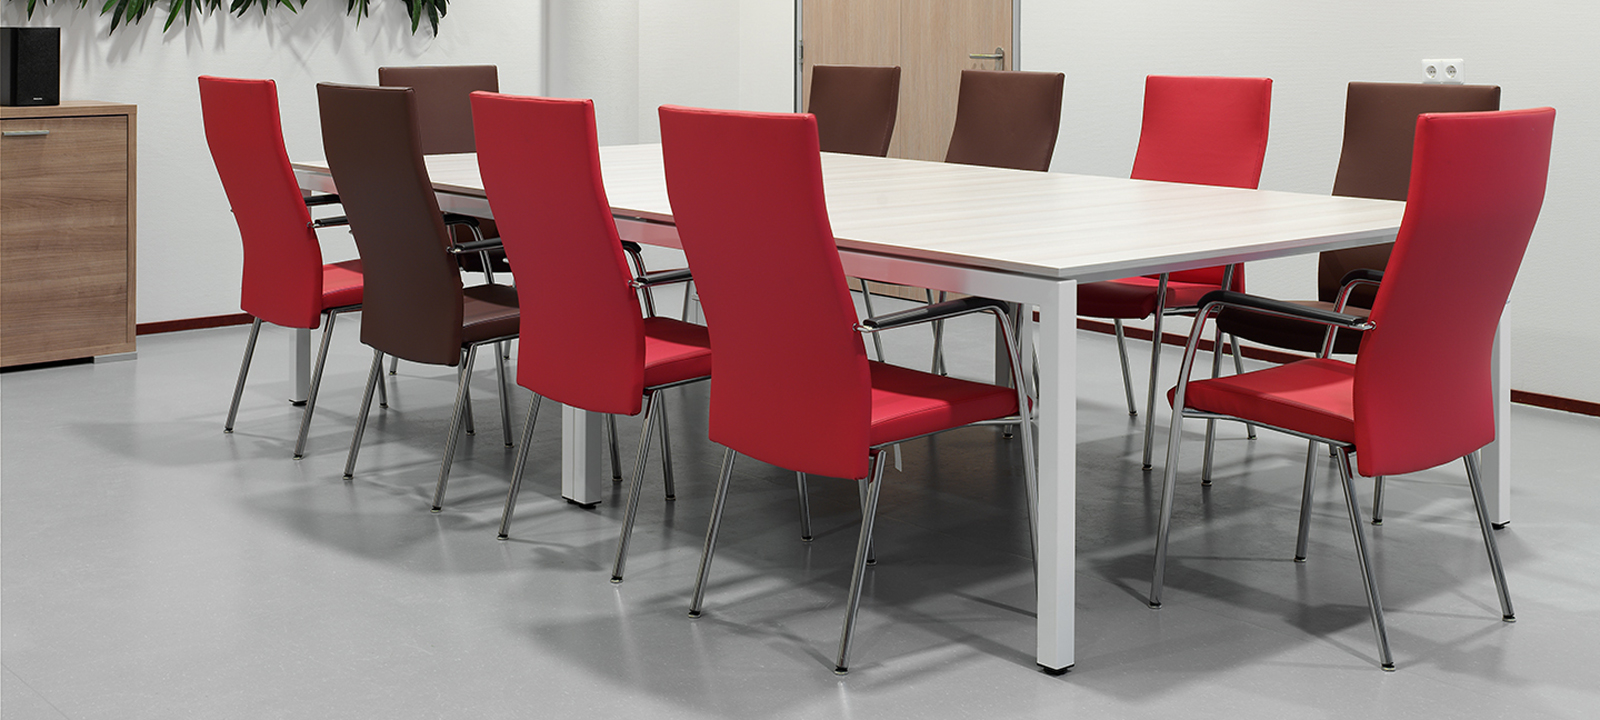 Iris meeting room chairs in red fabric